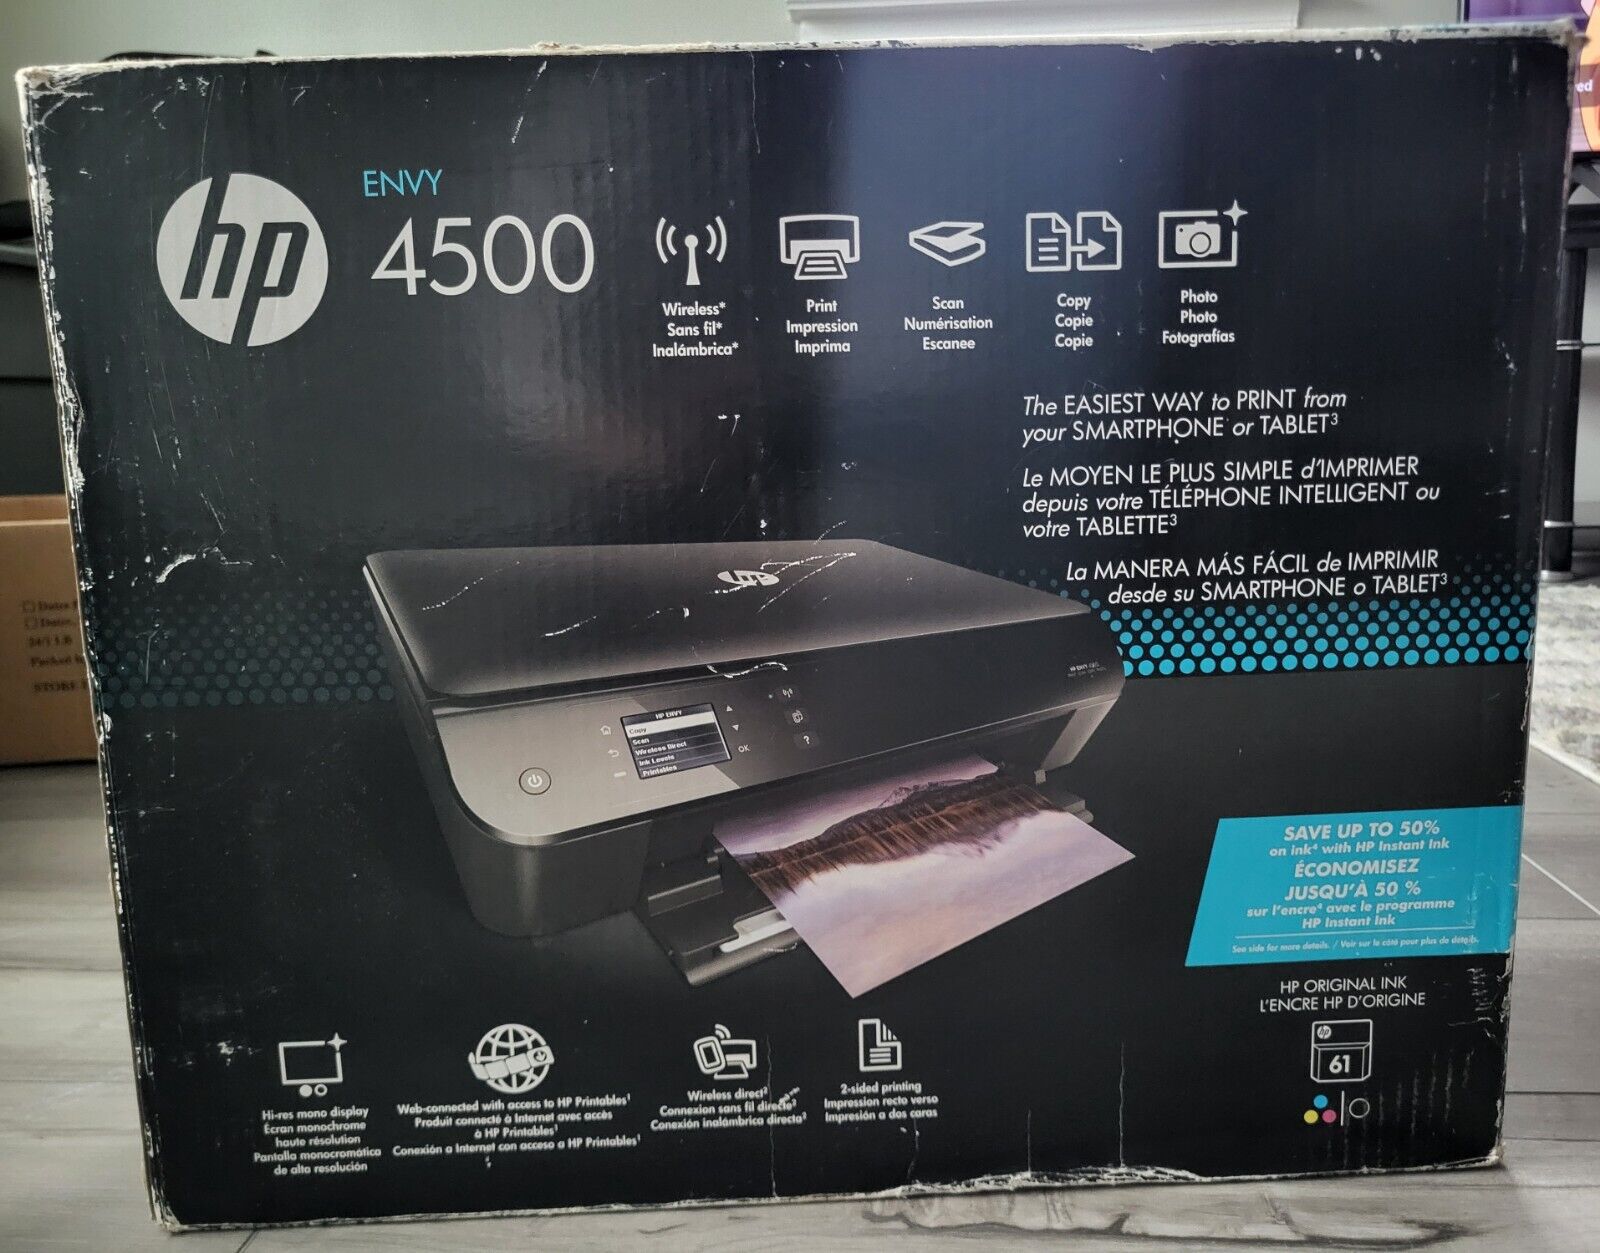 HP Envy 4500 e-All-in-One Printer   NEW 